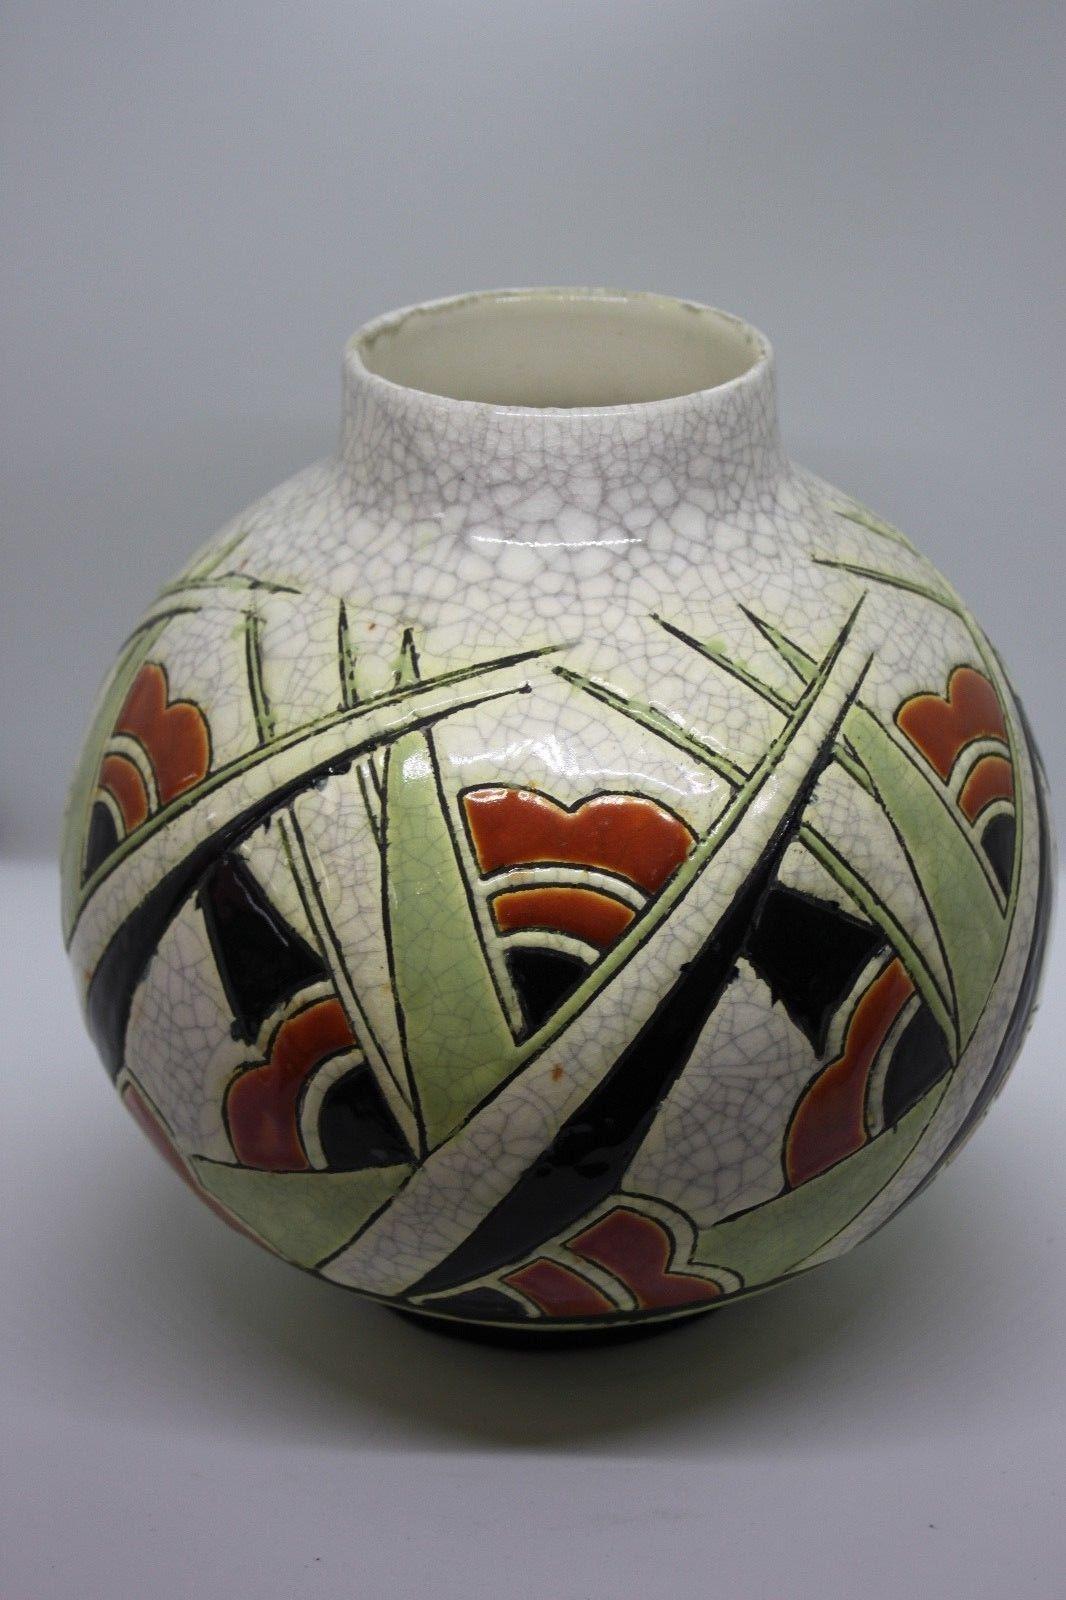 1930 vase of Catteau by Boch The louviere.
Dimensions: Height 25cm, diameter 22cm.